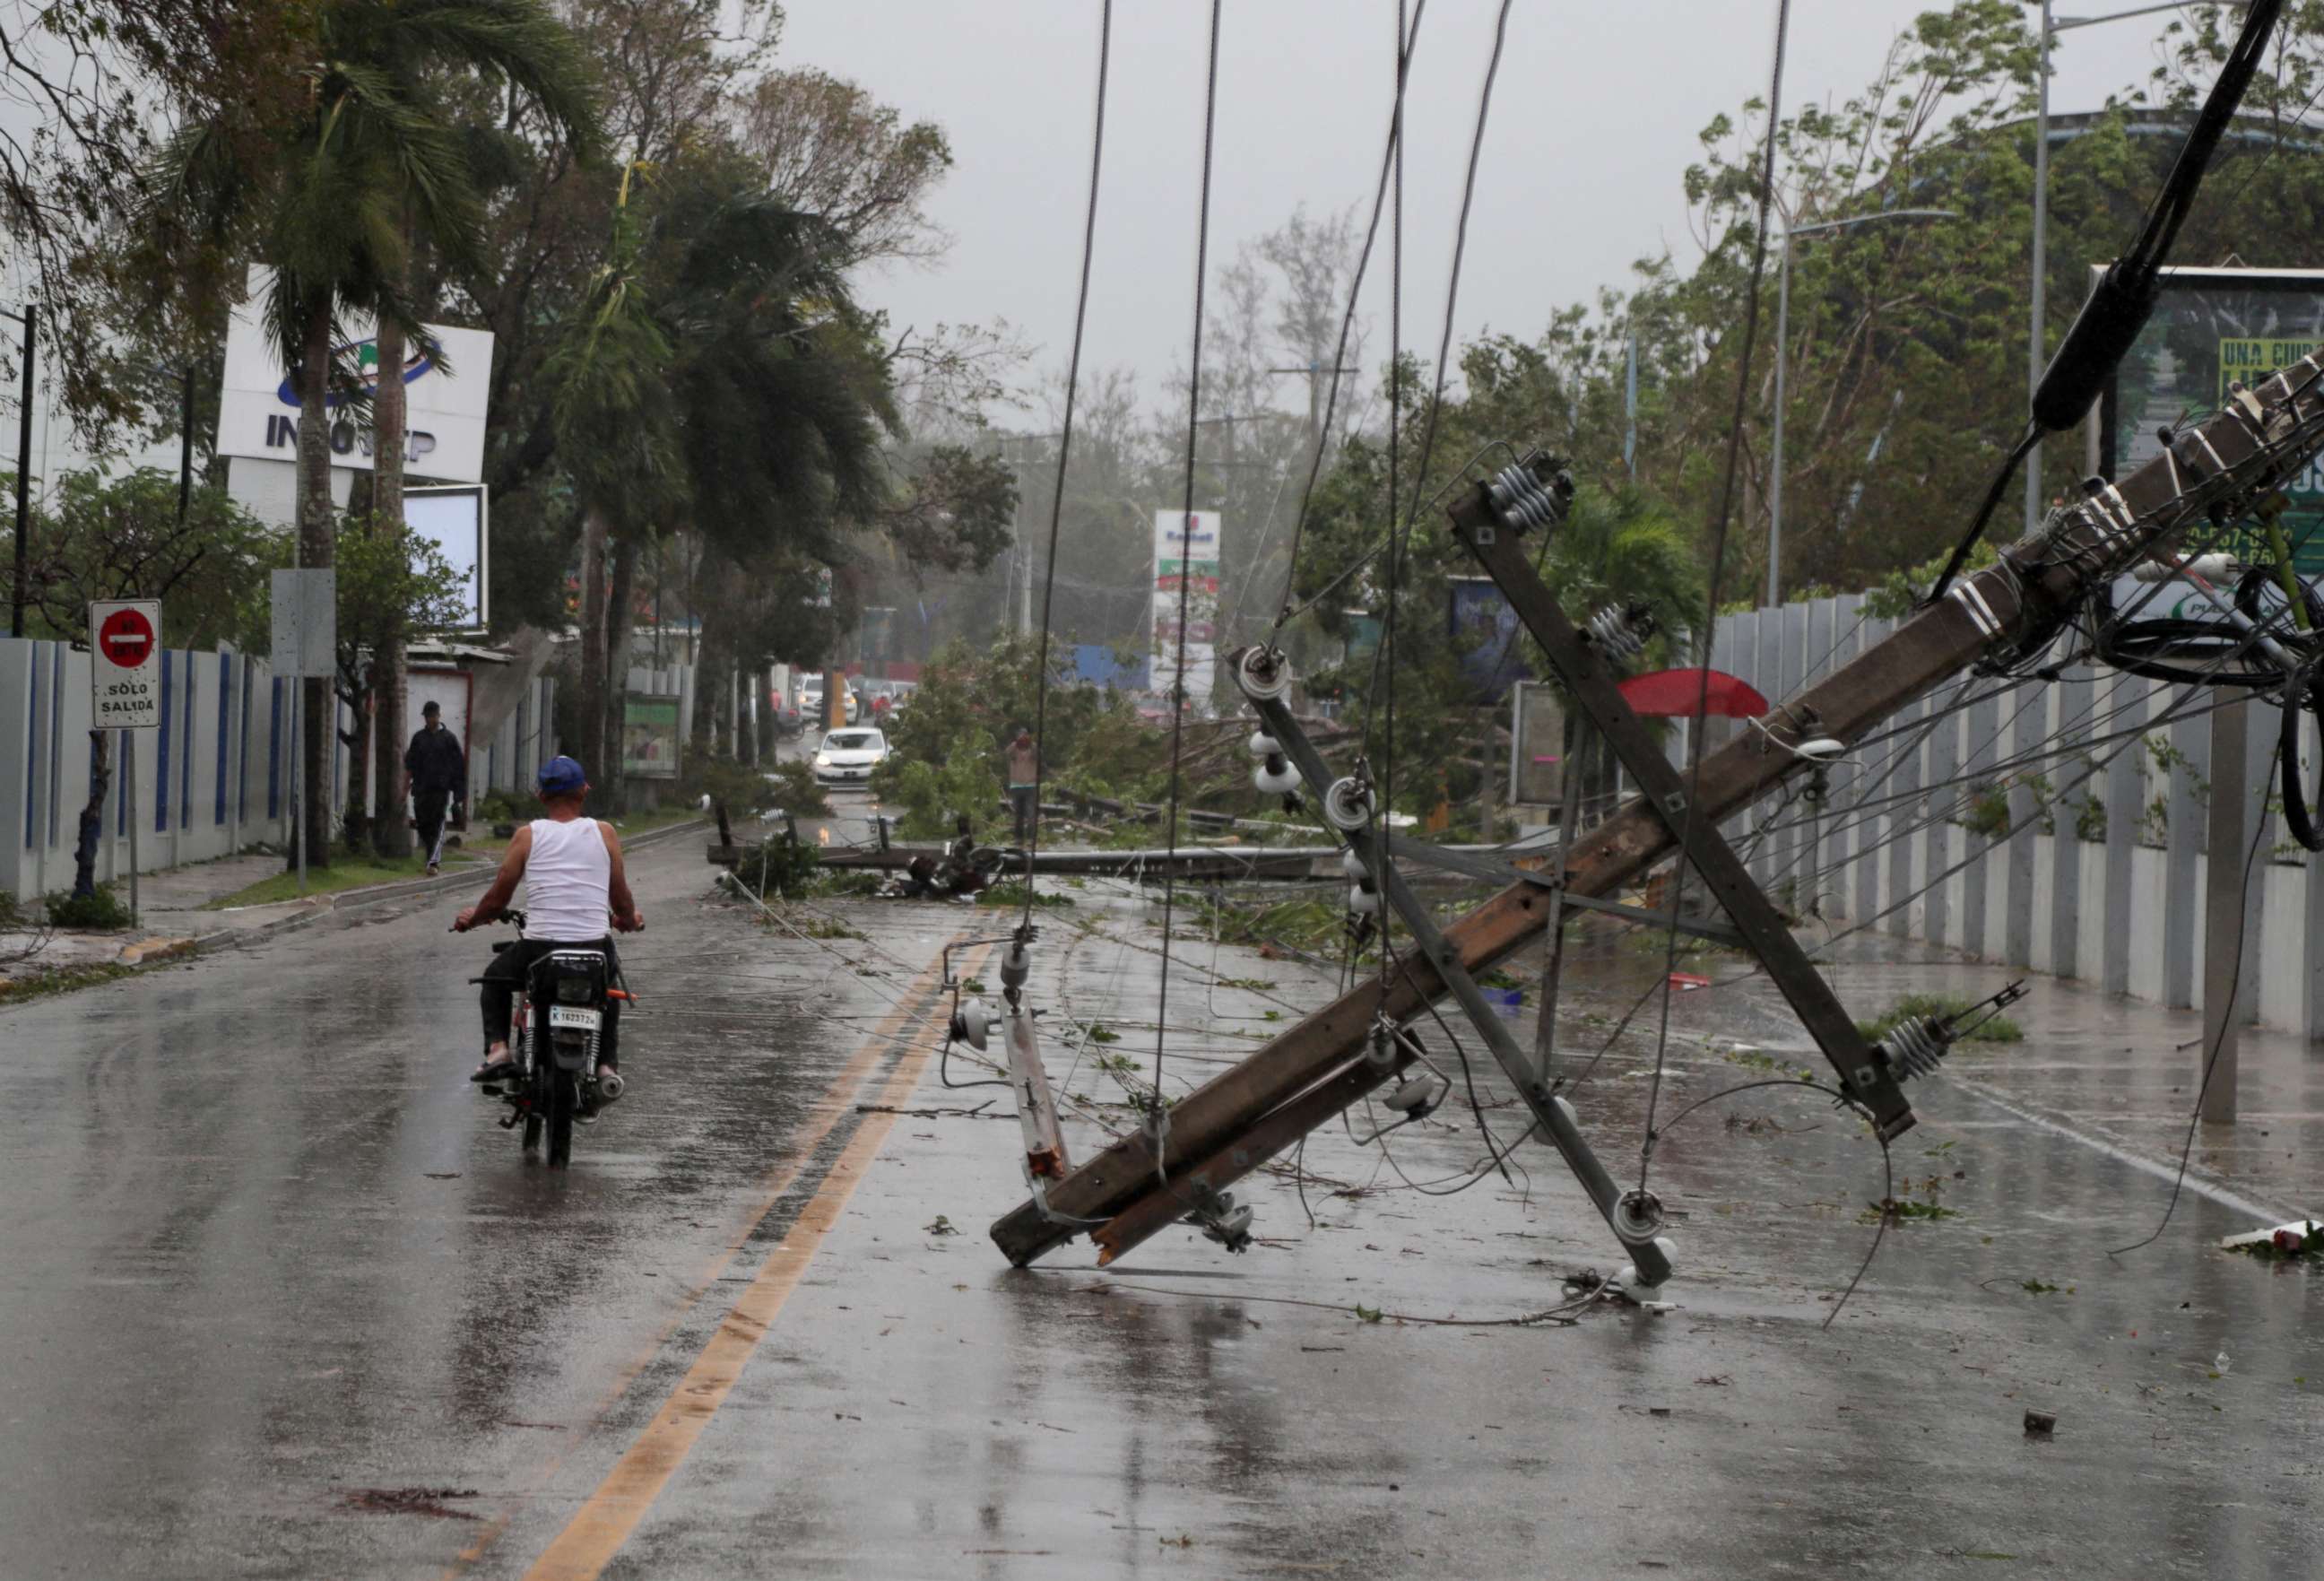 PHOTO: A man on a motorcycle rides past fallen power lines in the aftermath of Hurricane Fiona in Higuey, Dominican Republic, Sept. 19, 2022.